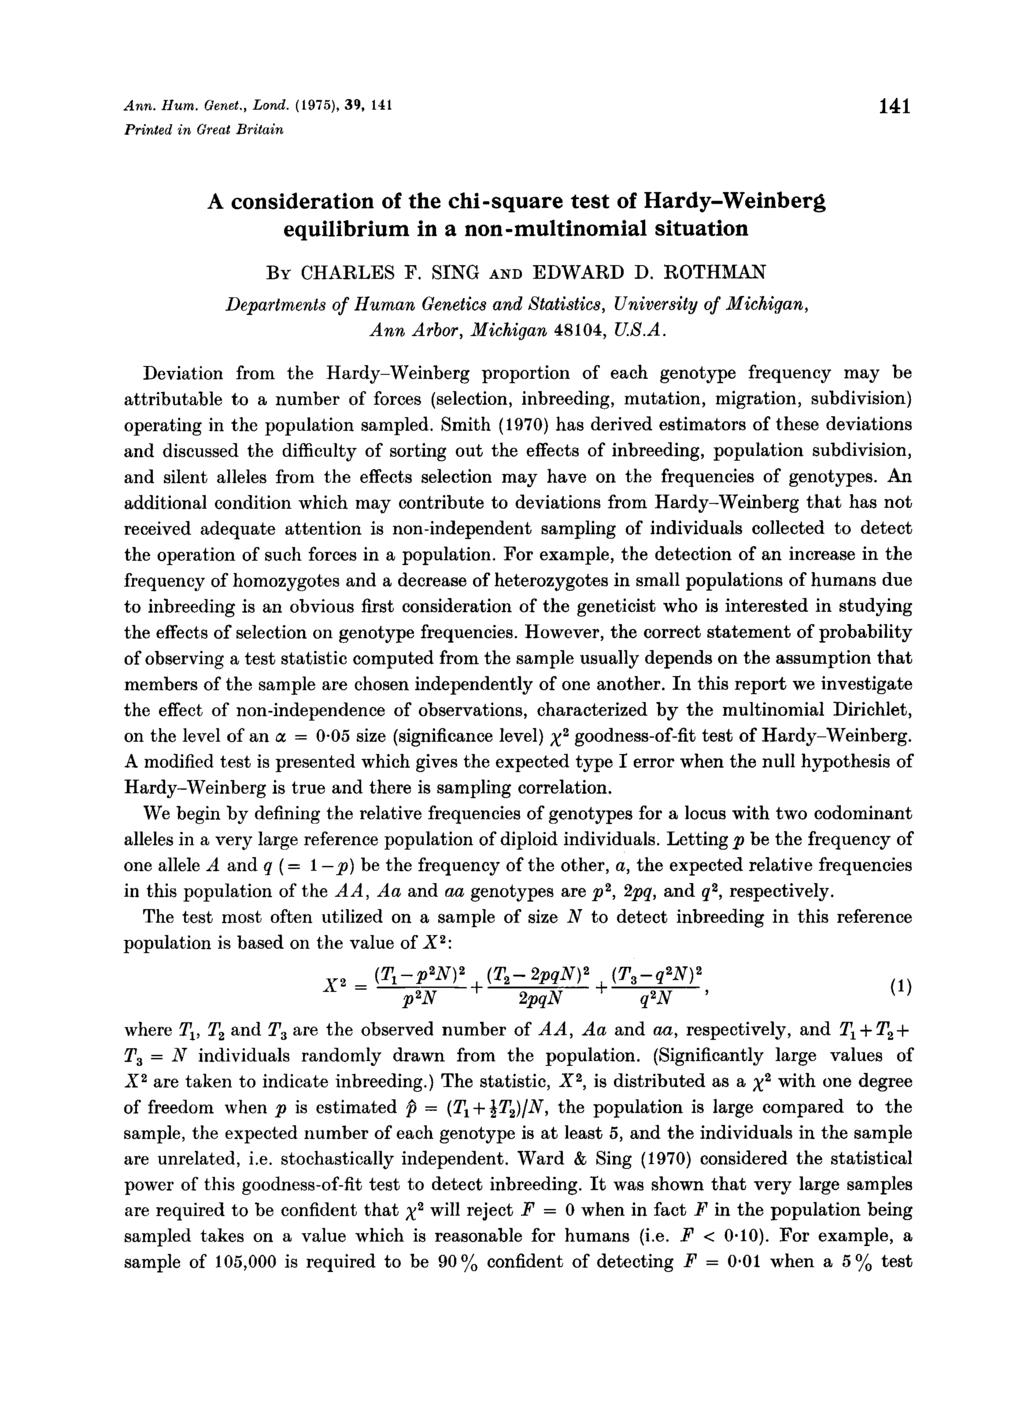 Ann. Hum. Genet., Lond. (1975), 39, 141 Printed in Great Britain 141 A consideration of the chi-square test of Hardy-Weinberg equilibrium in a non-multinomial situation BY CHARLES F.